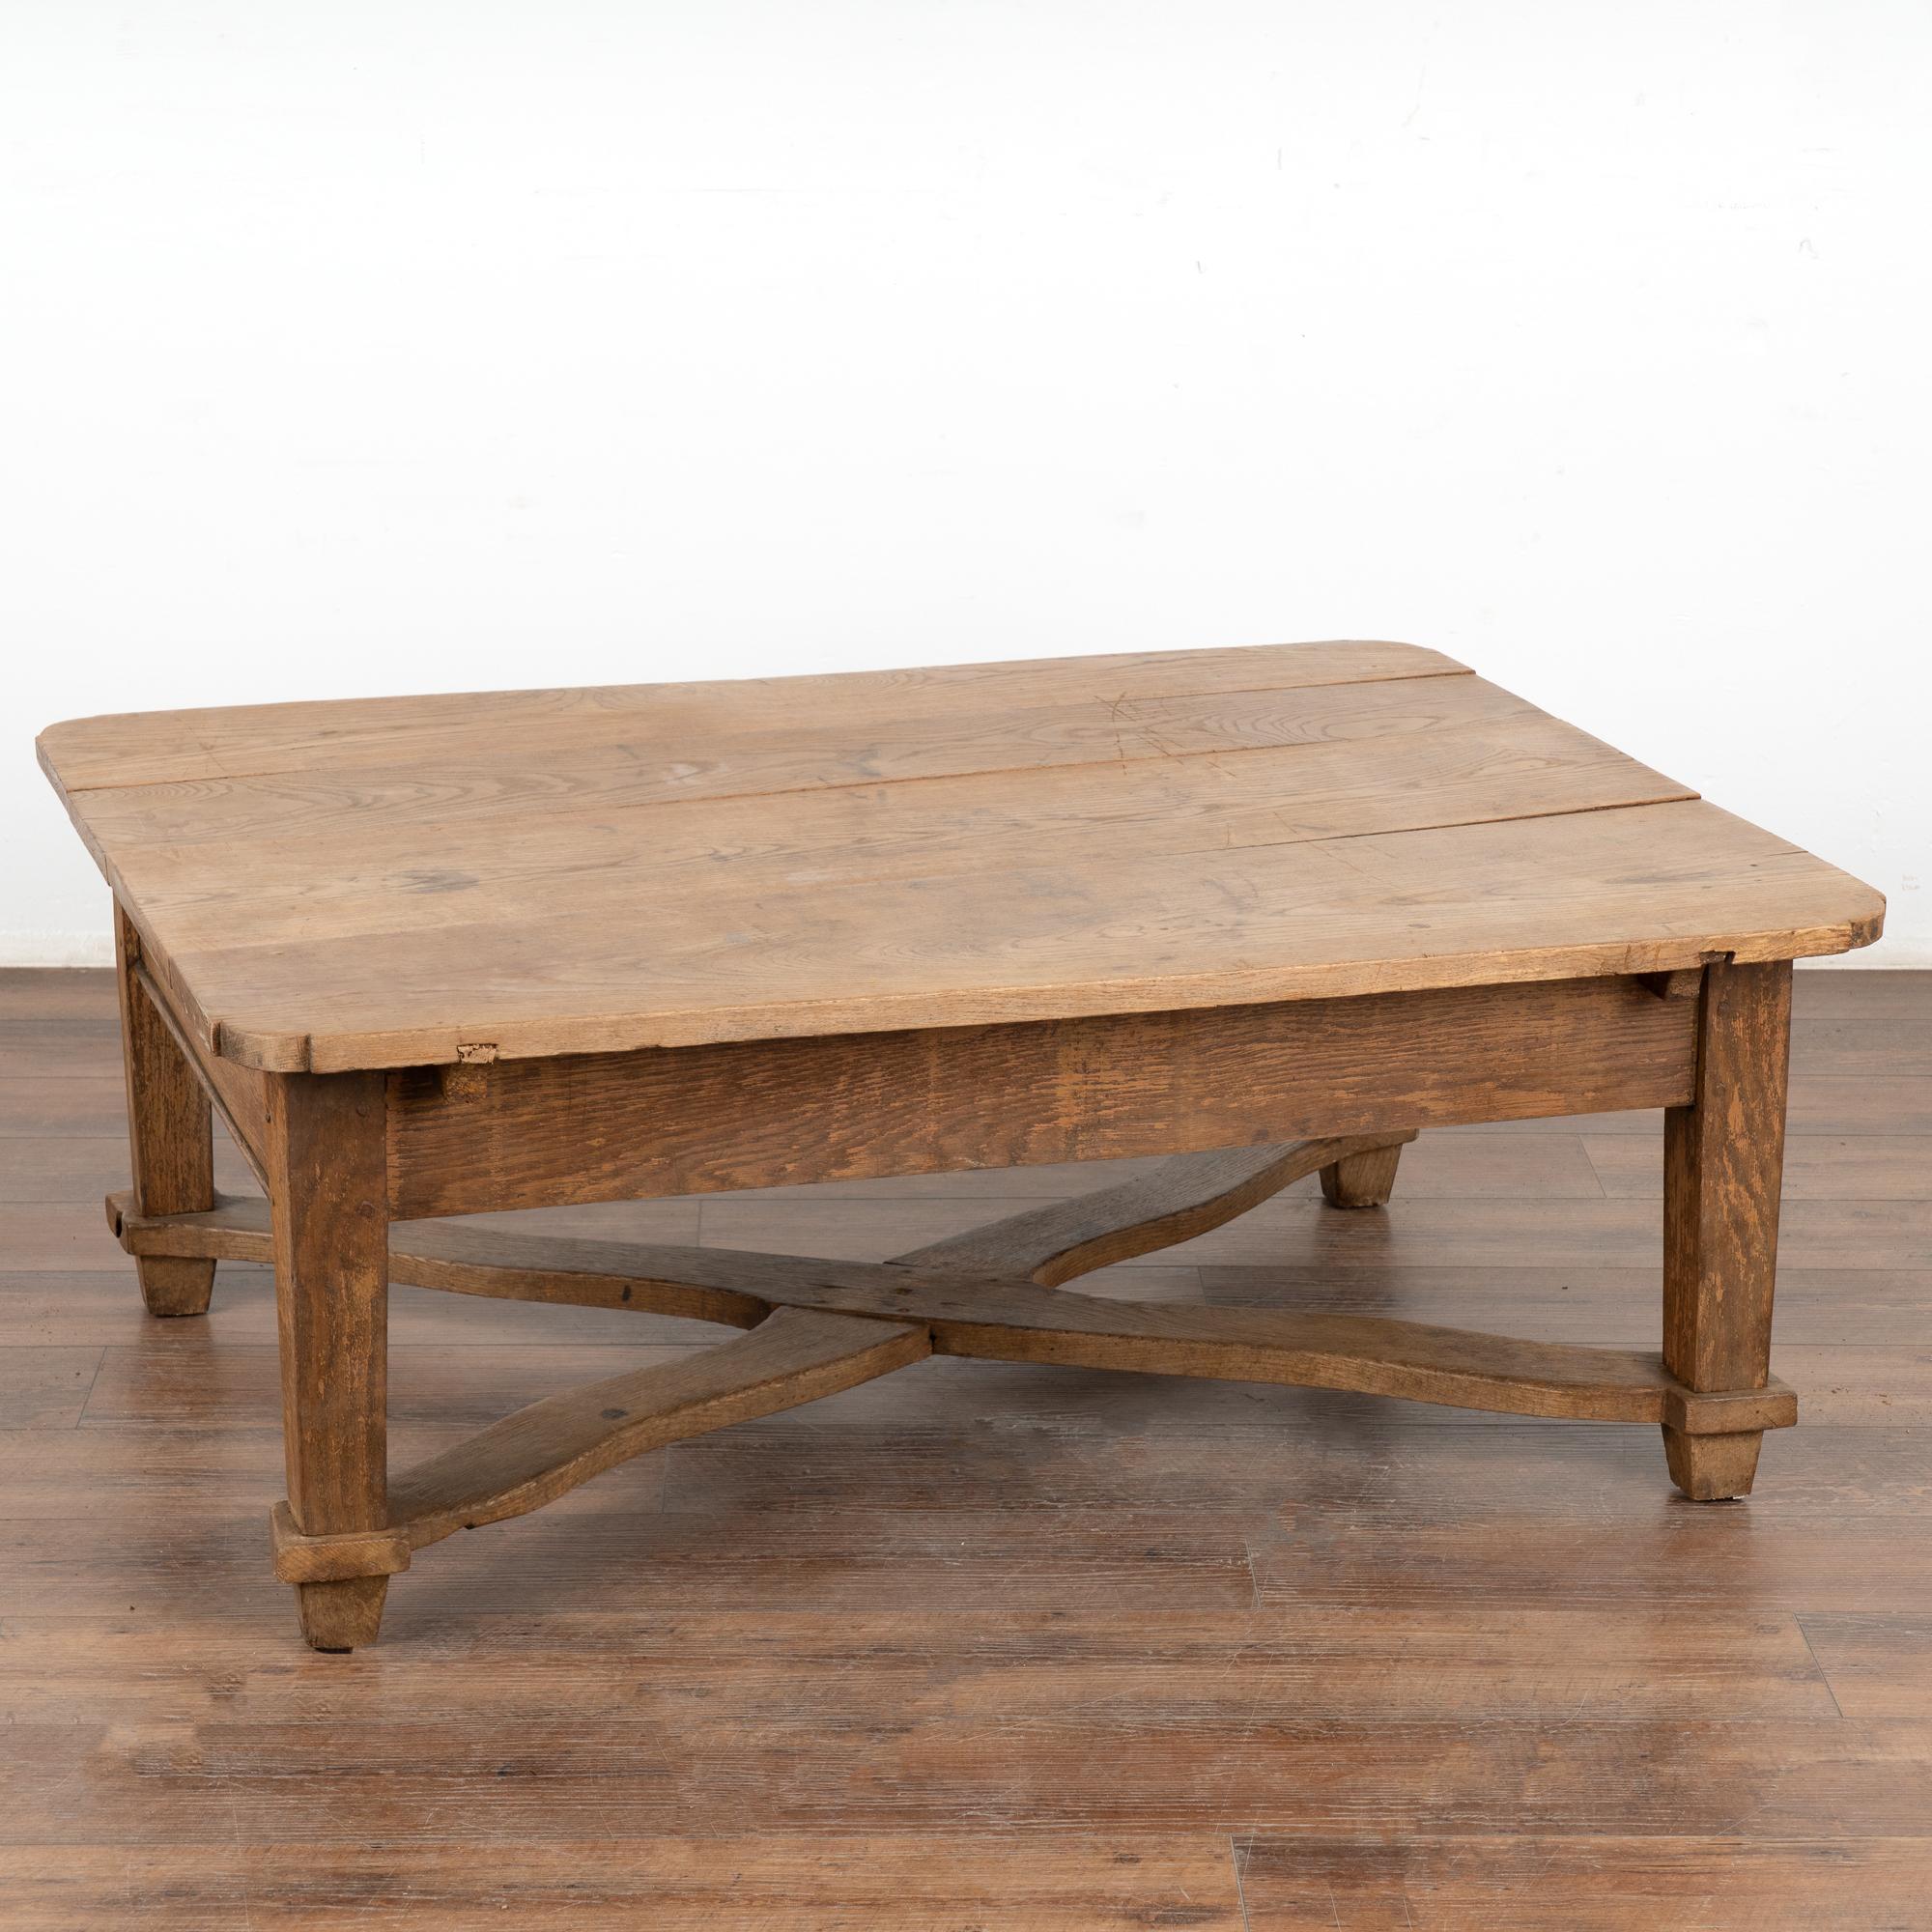 Rustic oak coffee table with  